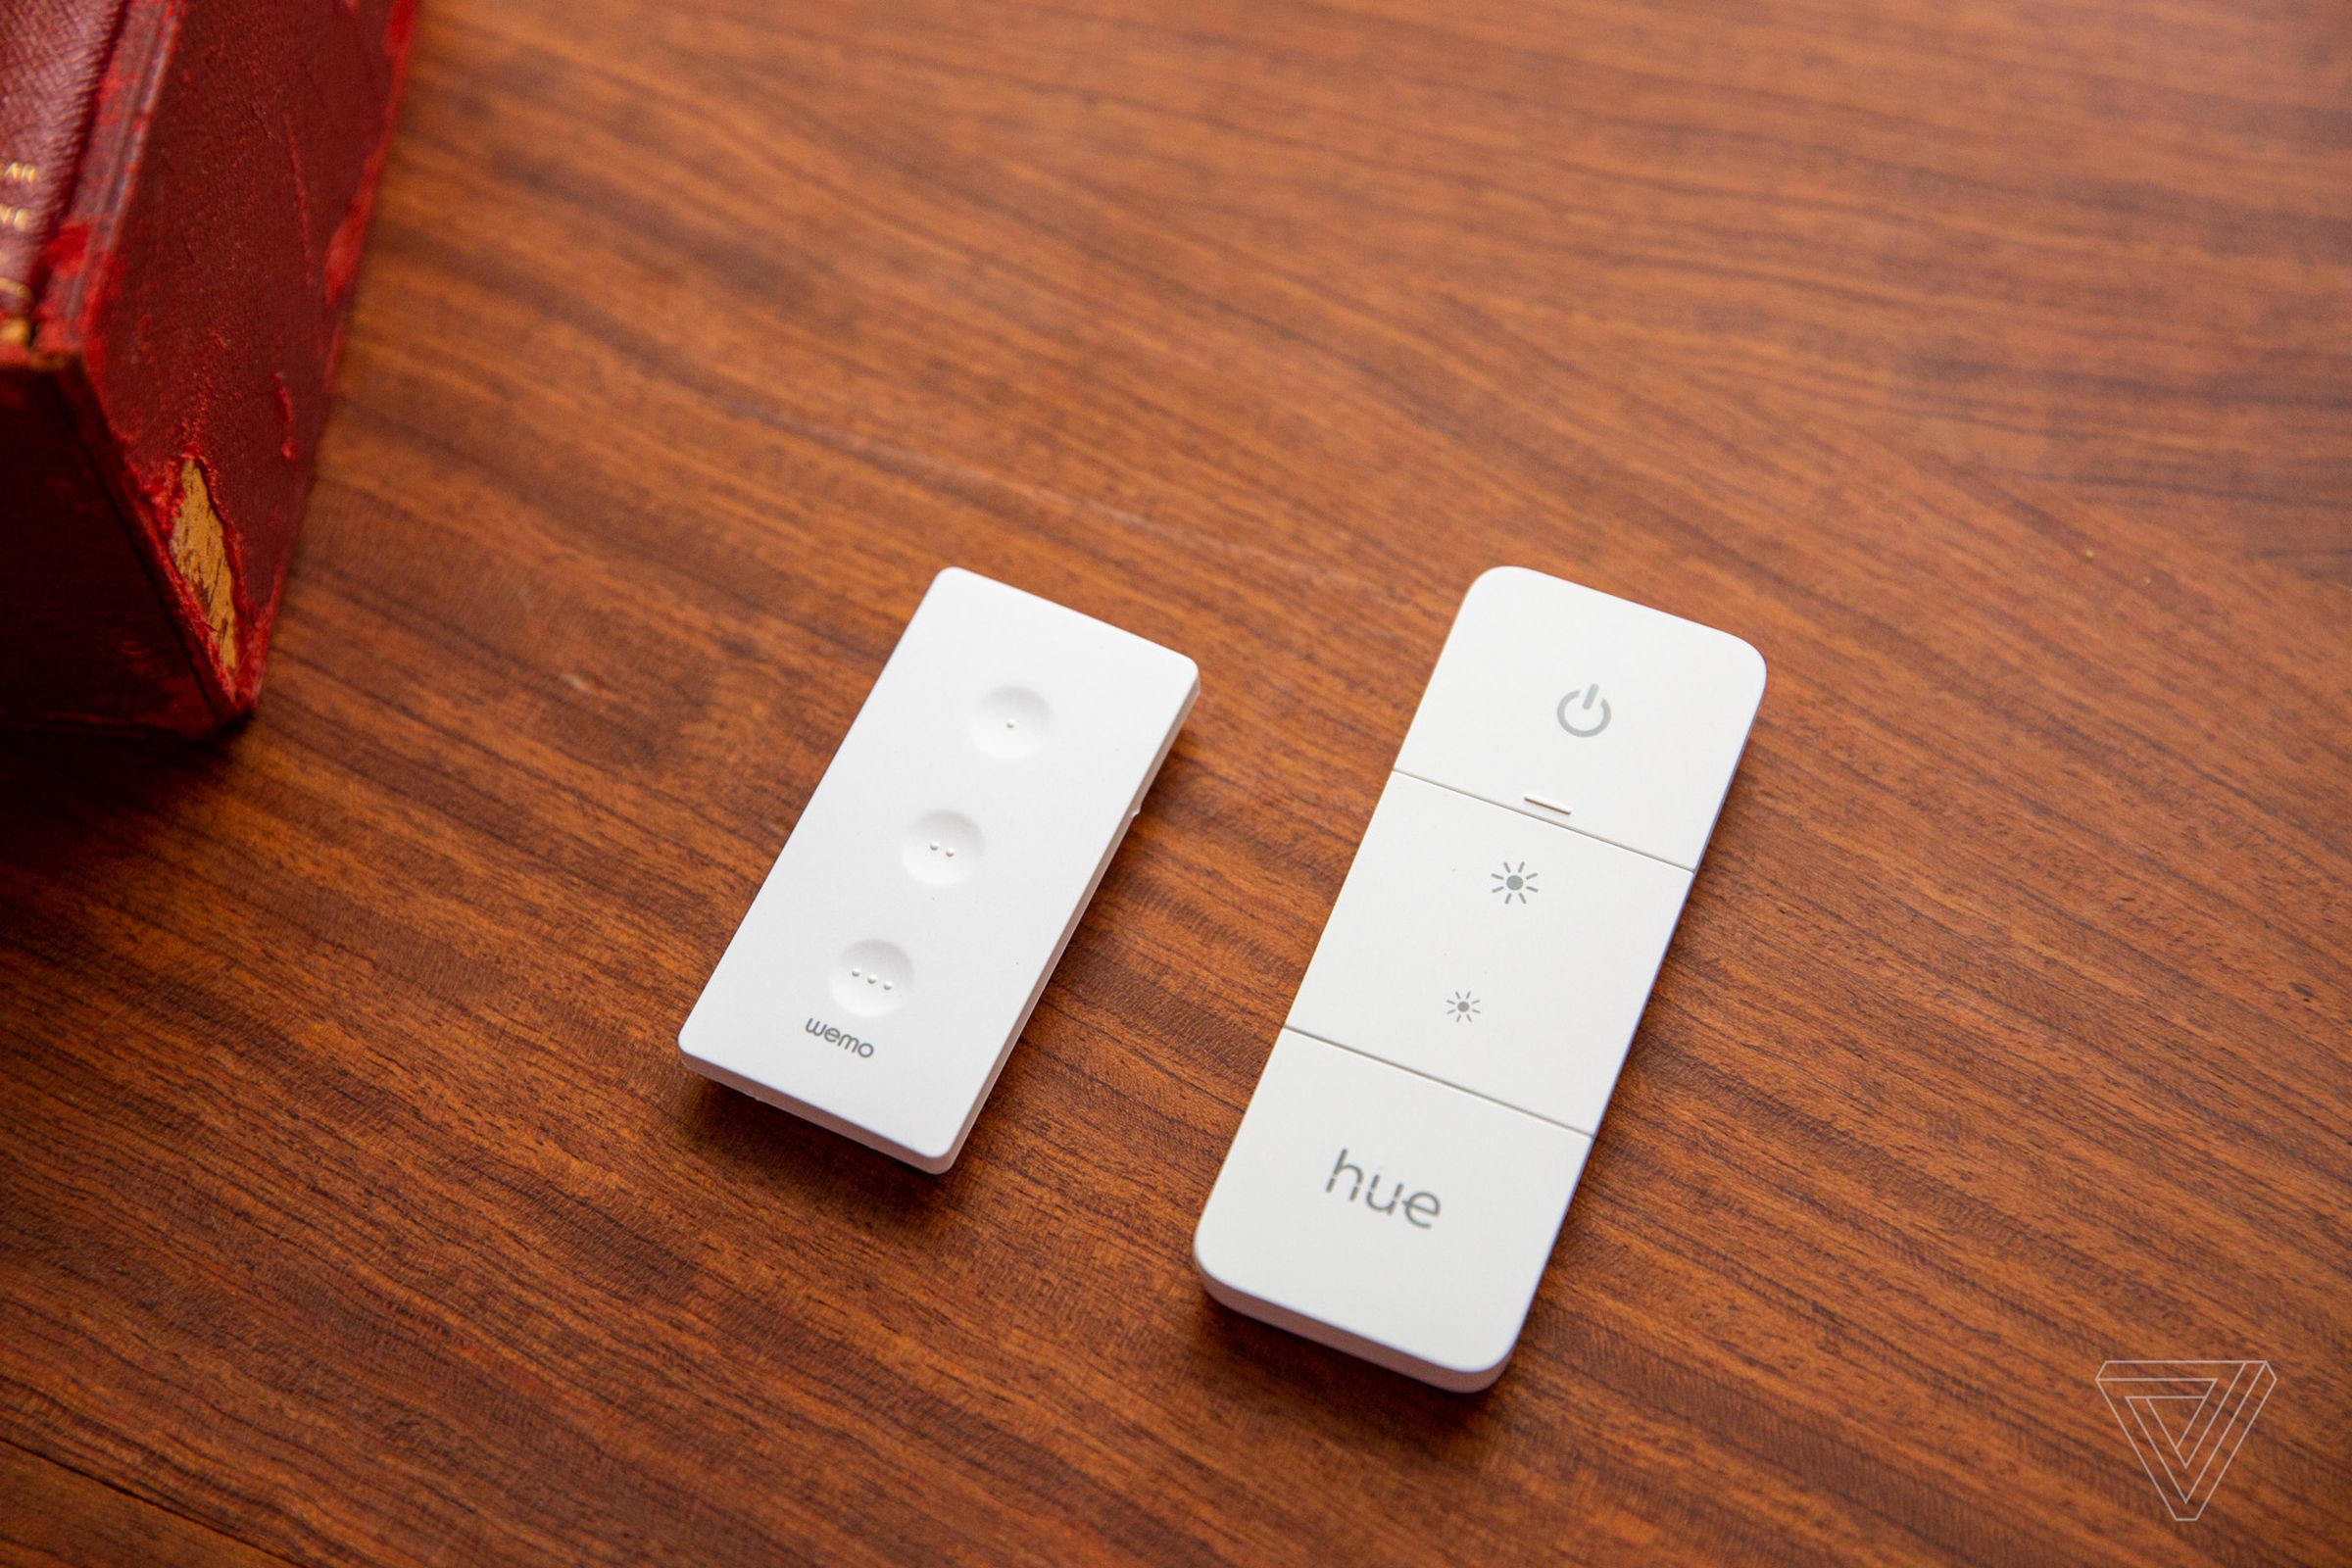 The Wemo Stage and the Hue Dimmer Switch, which can also act as a scene controller for HomeKit but with fewer button press options.